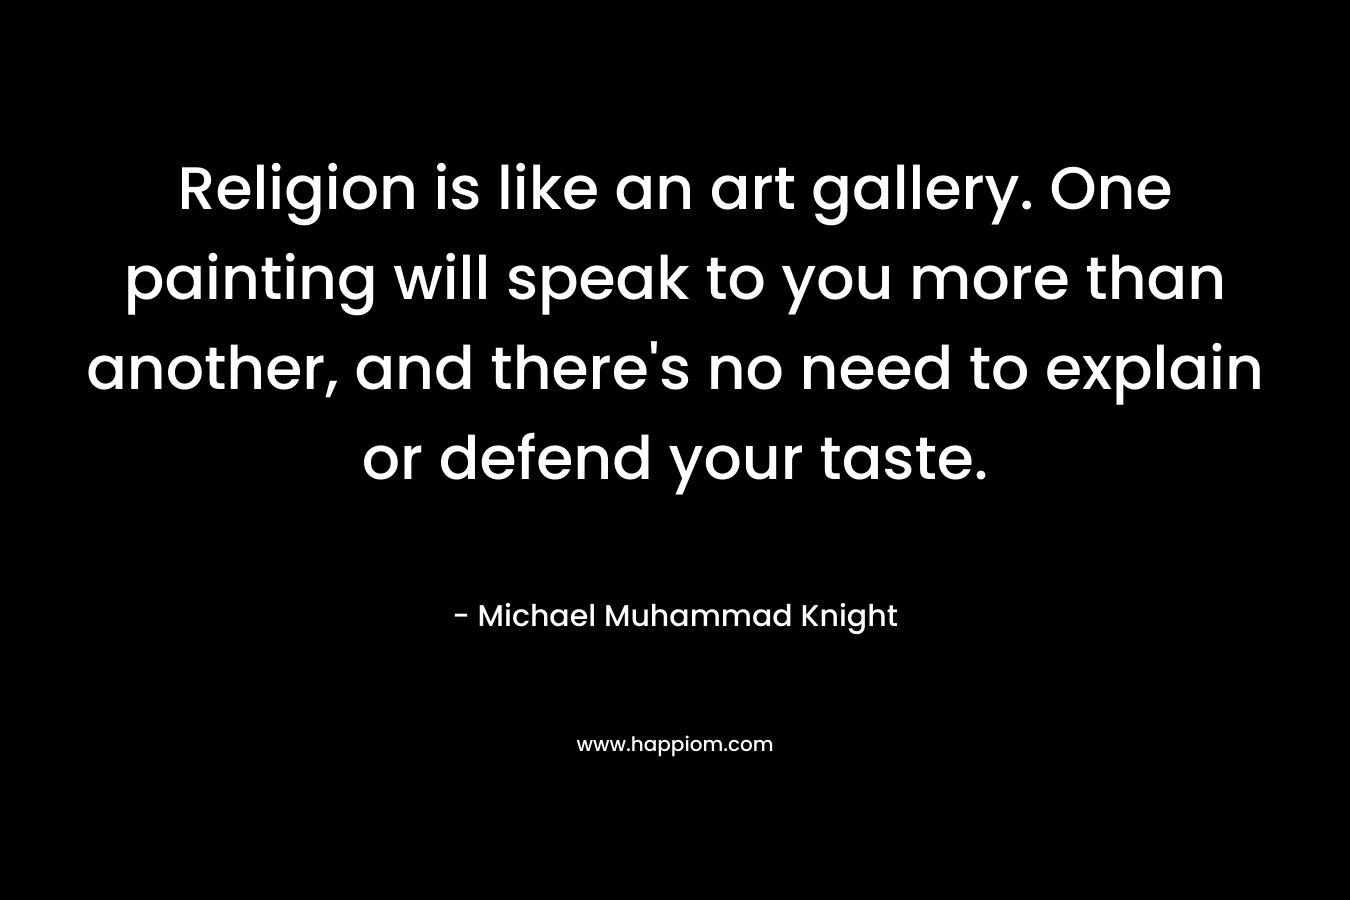 Religion is like an art gallery. One painting will speak to you more than another, and there's no need to explain or defend your taste.